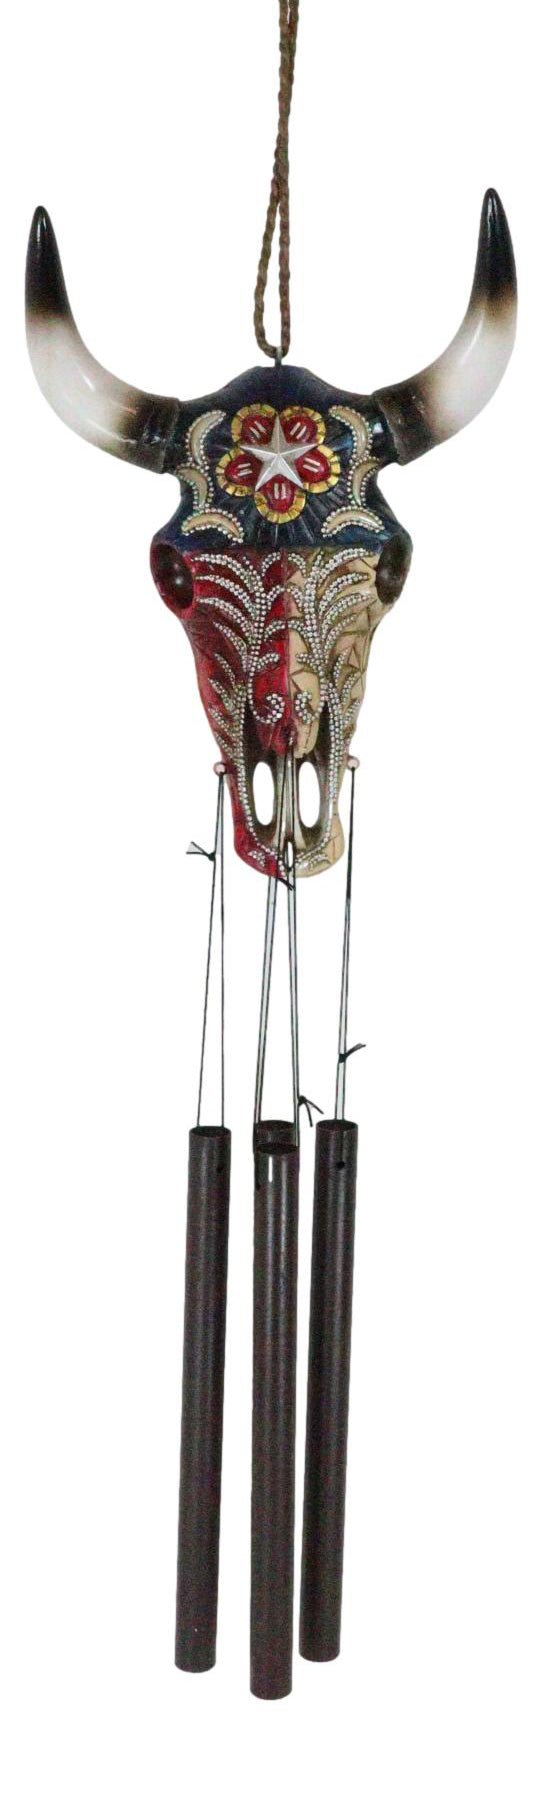 Rustic Western Star Colorful Texas Flag Floral Pattern Bull Cow Skull Wind Chime